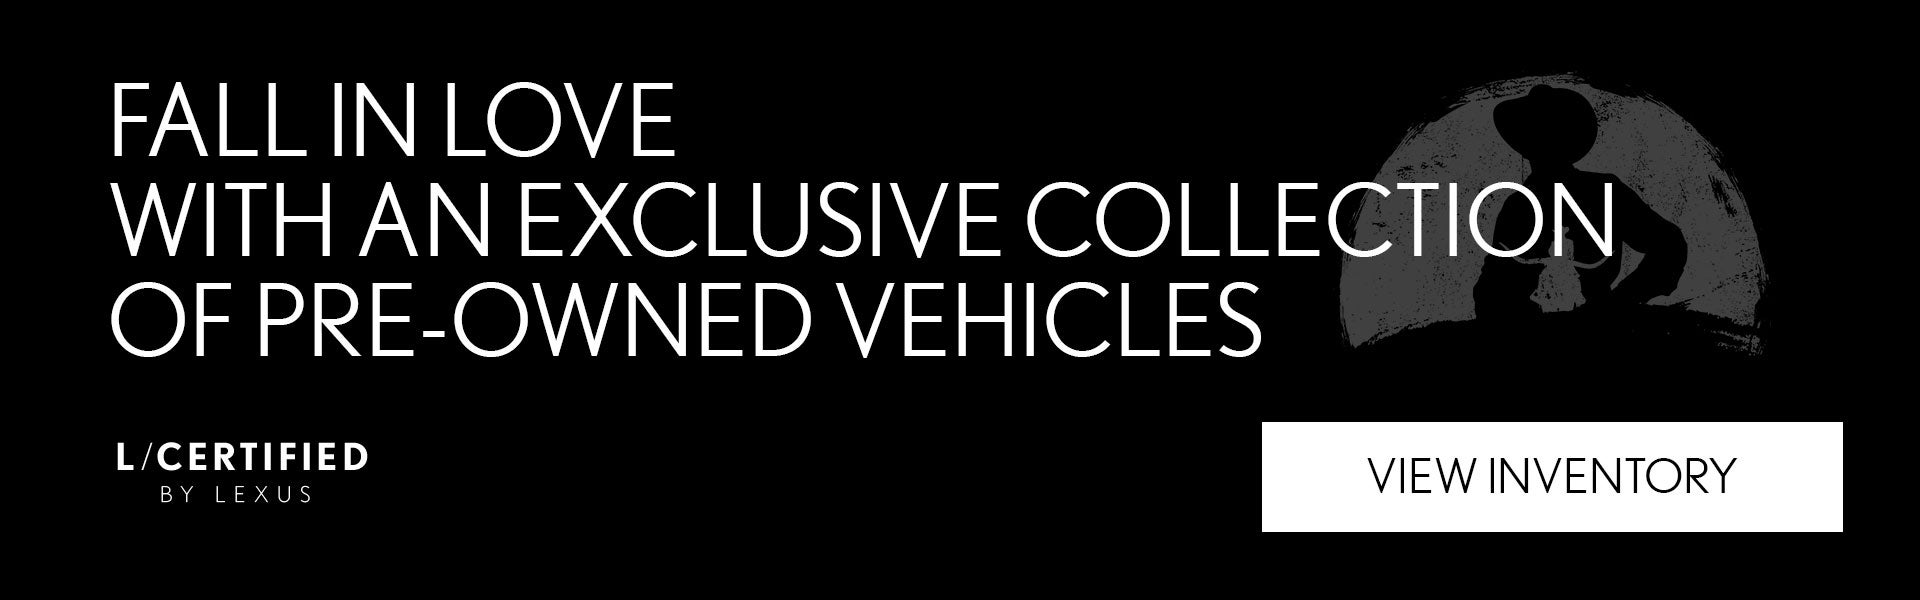 View the Exclusive L/Certified by Lexus Collection